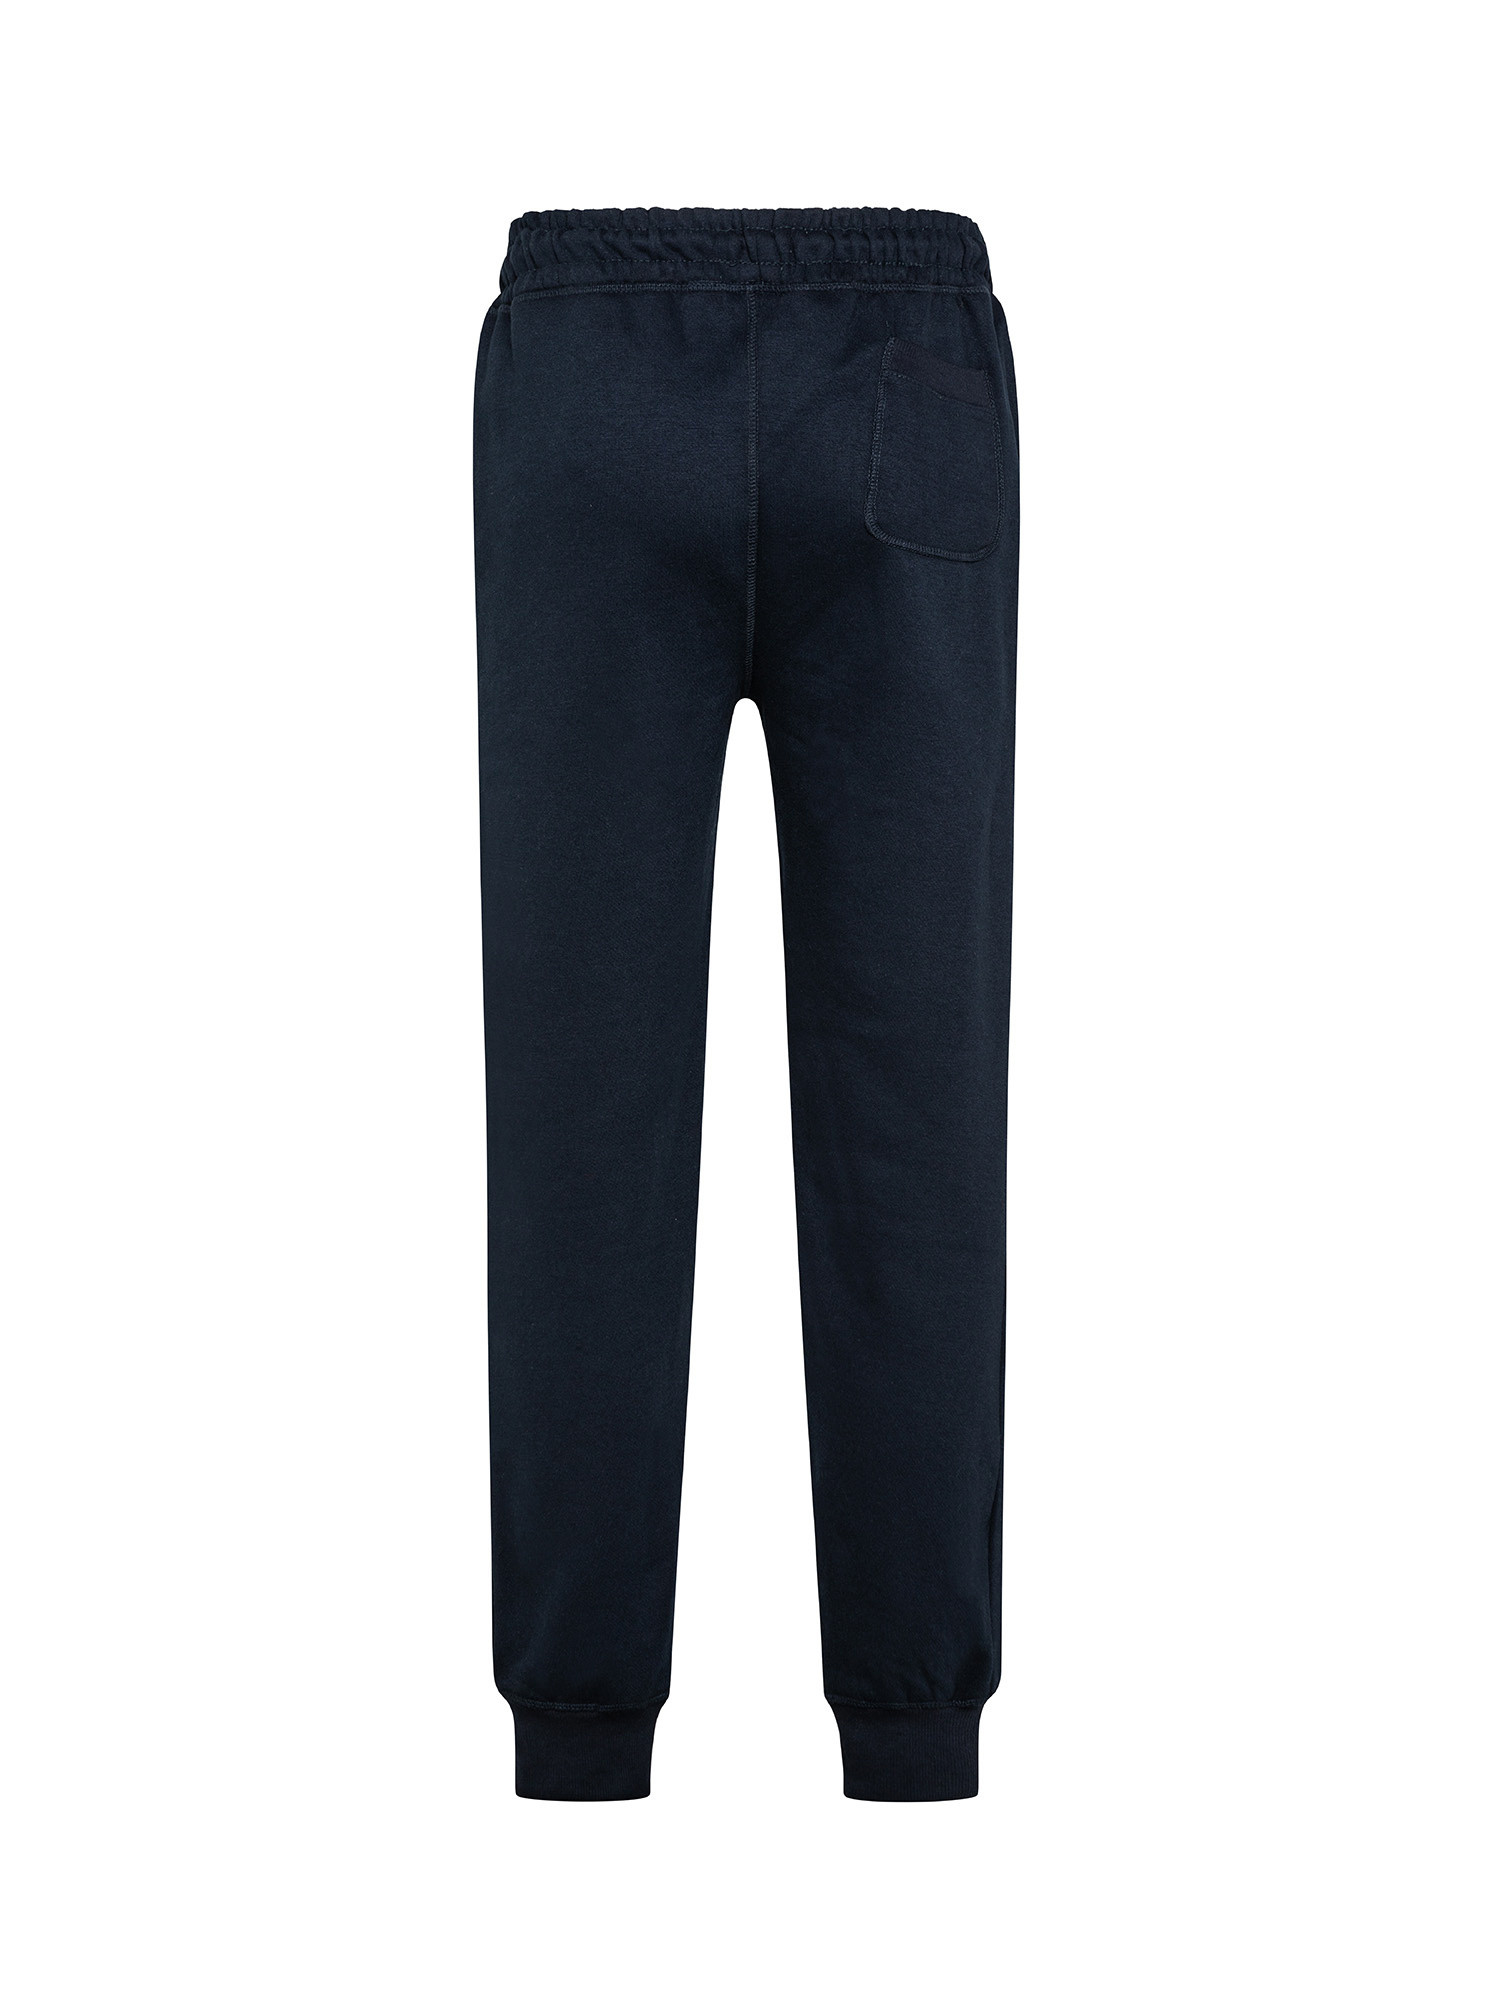 JCT - Trousers with print, Dark Blue, large image number 1